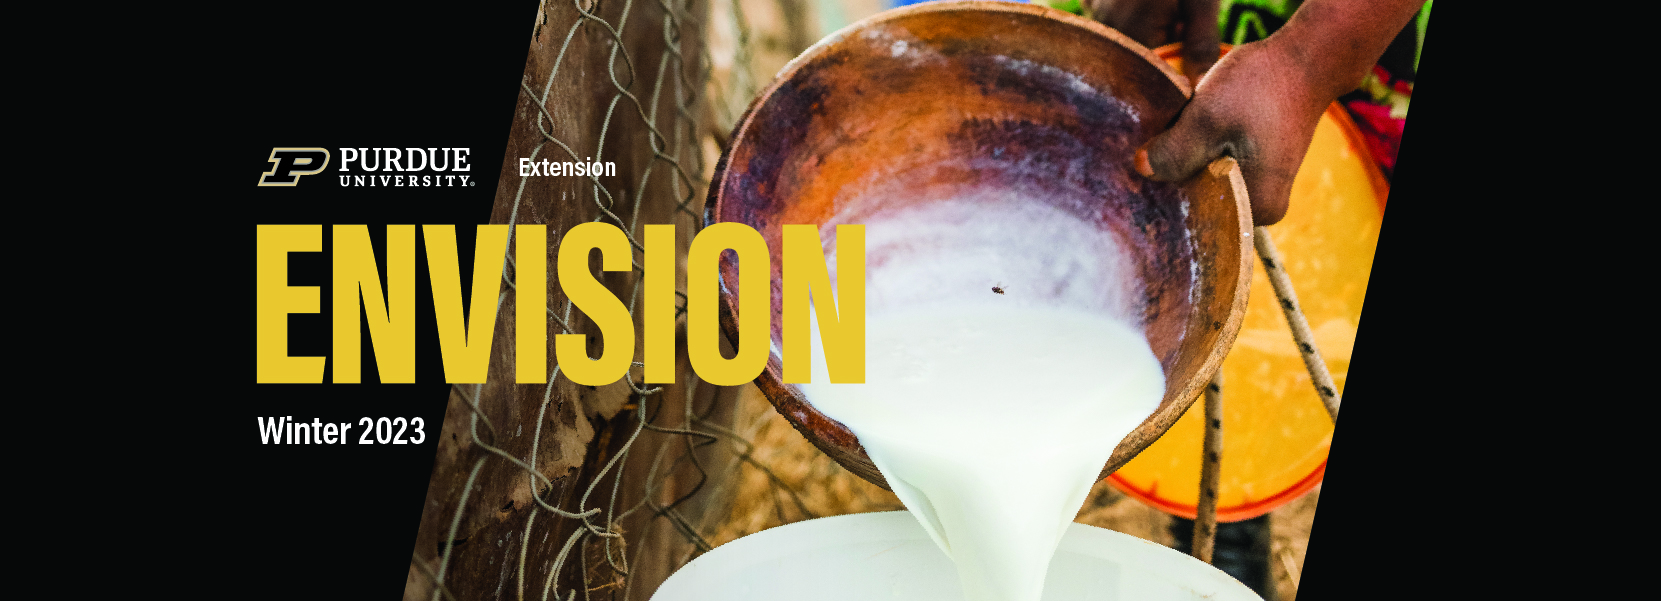 Purdue College of Agriculture and Extension Envision magazine